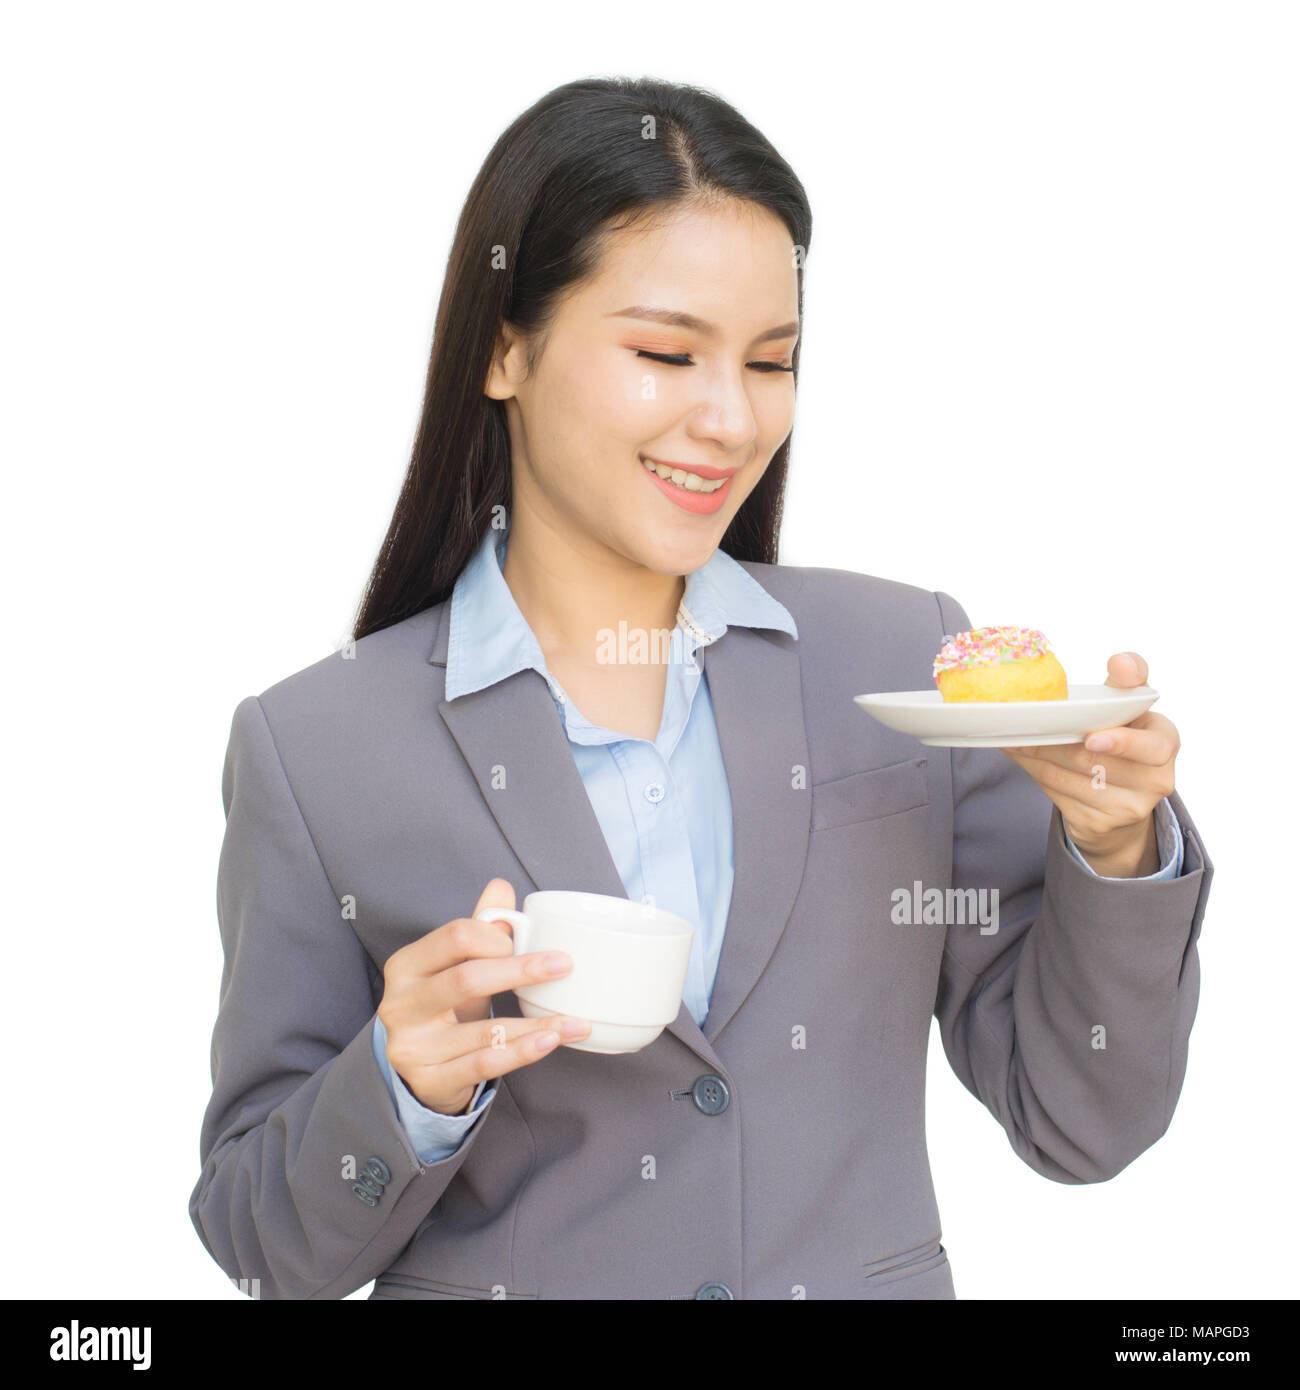 Portrait of business woman with cup of tea or coffee and one hand holding donut isolated on white background Stock Photo